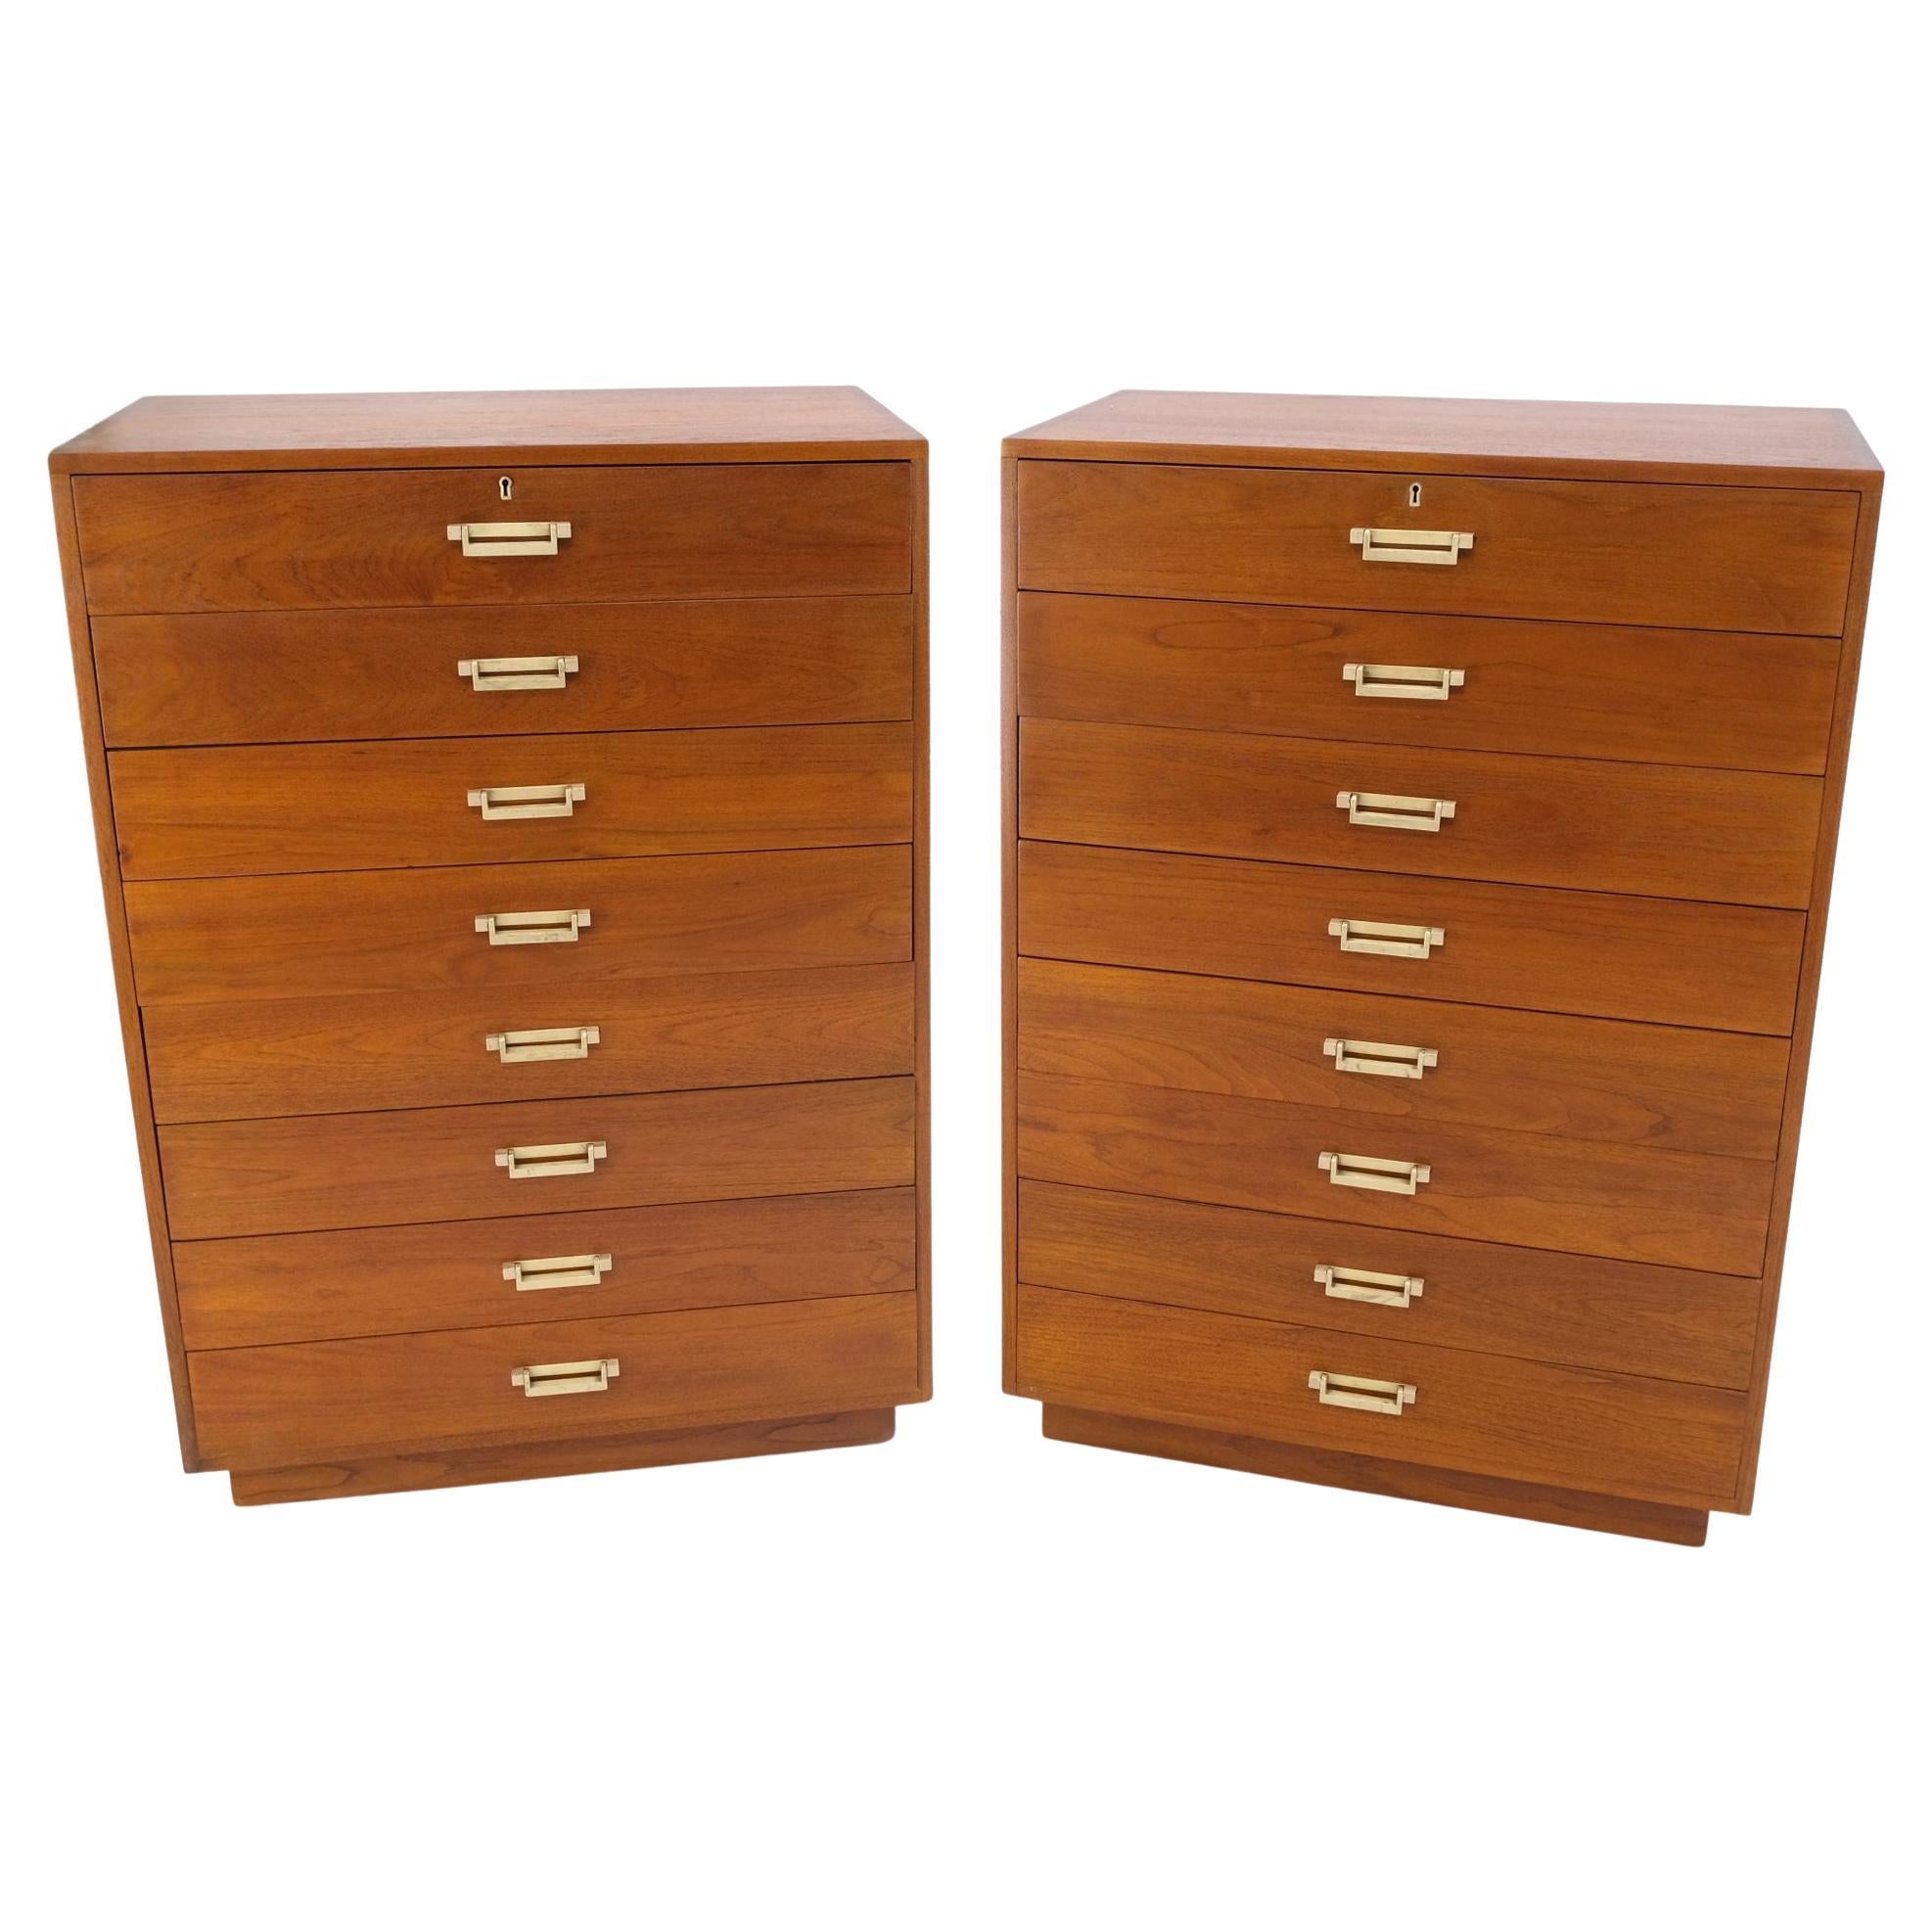 Pair Tall 8 Drawers Studio Made Solid Teak Dovetail Joints Chests Dressers MINT For Sale